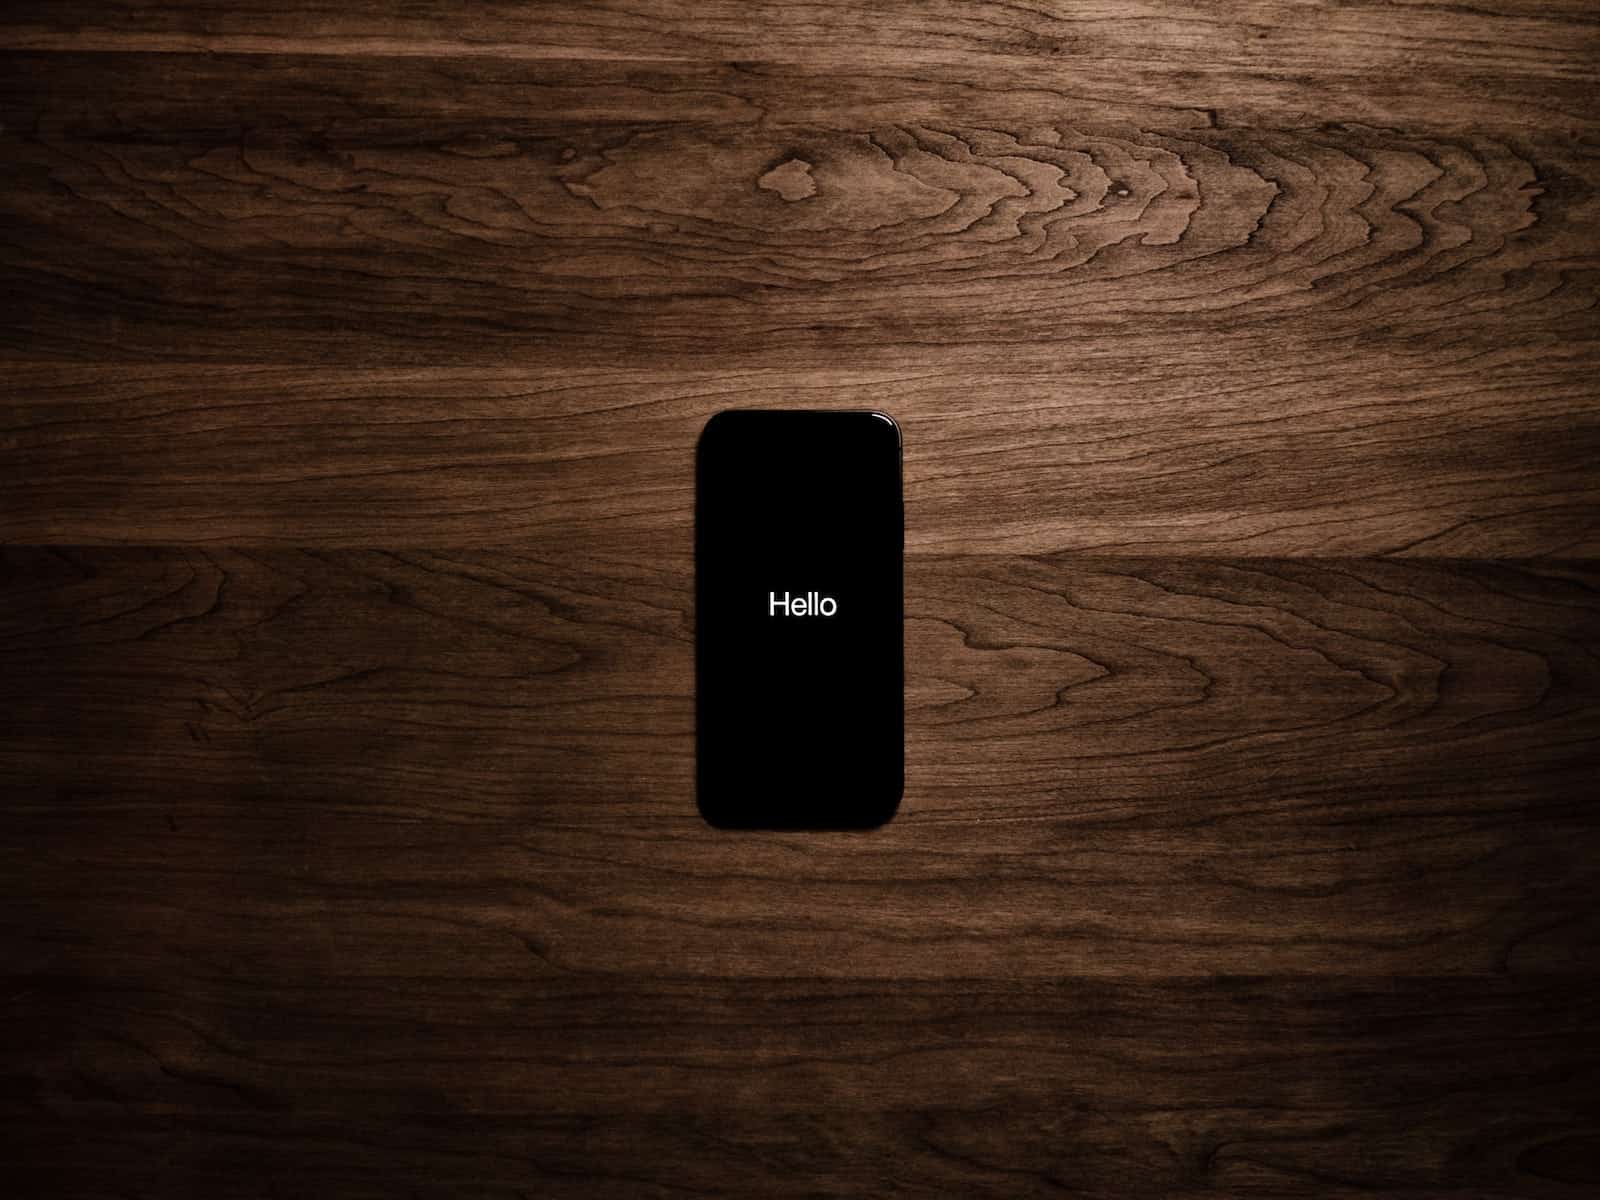 Turned on Black Iphone 7 Displaying Hello